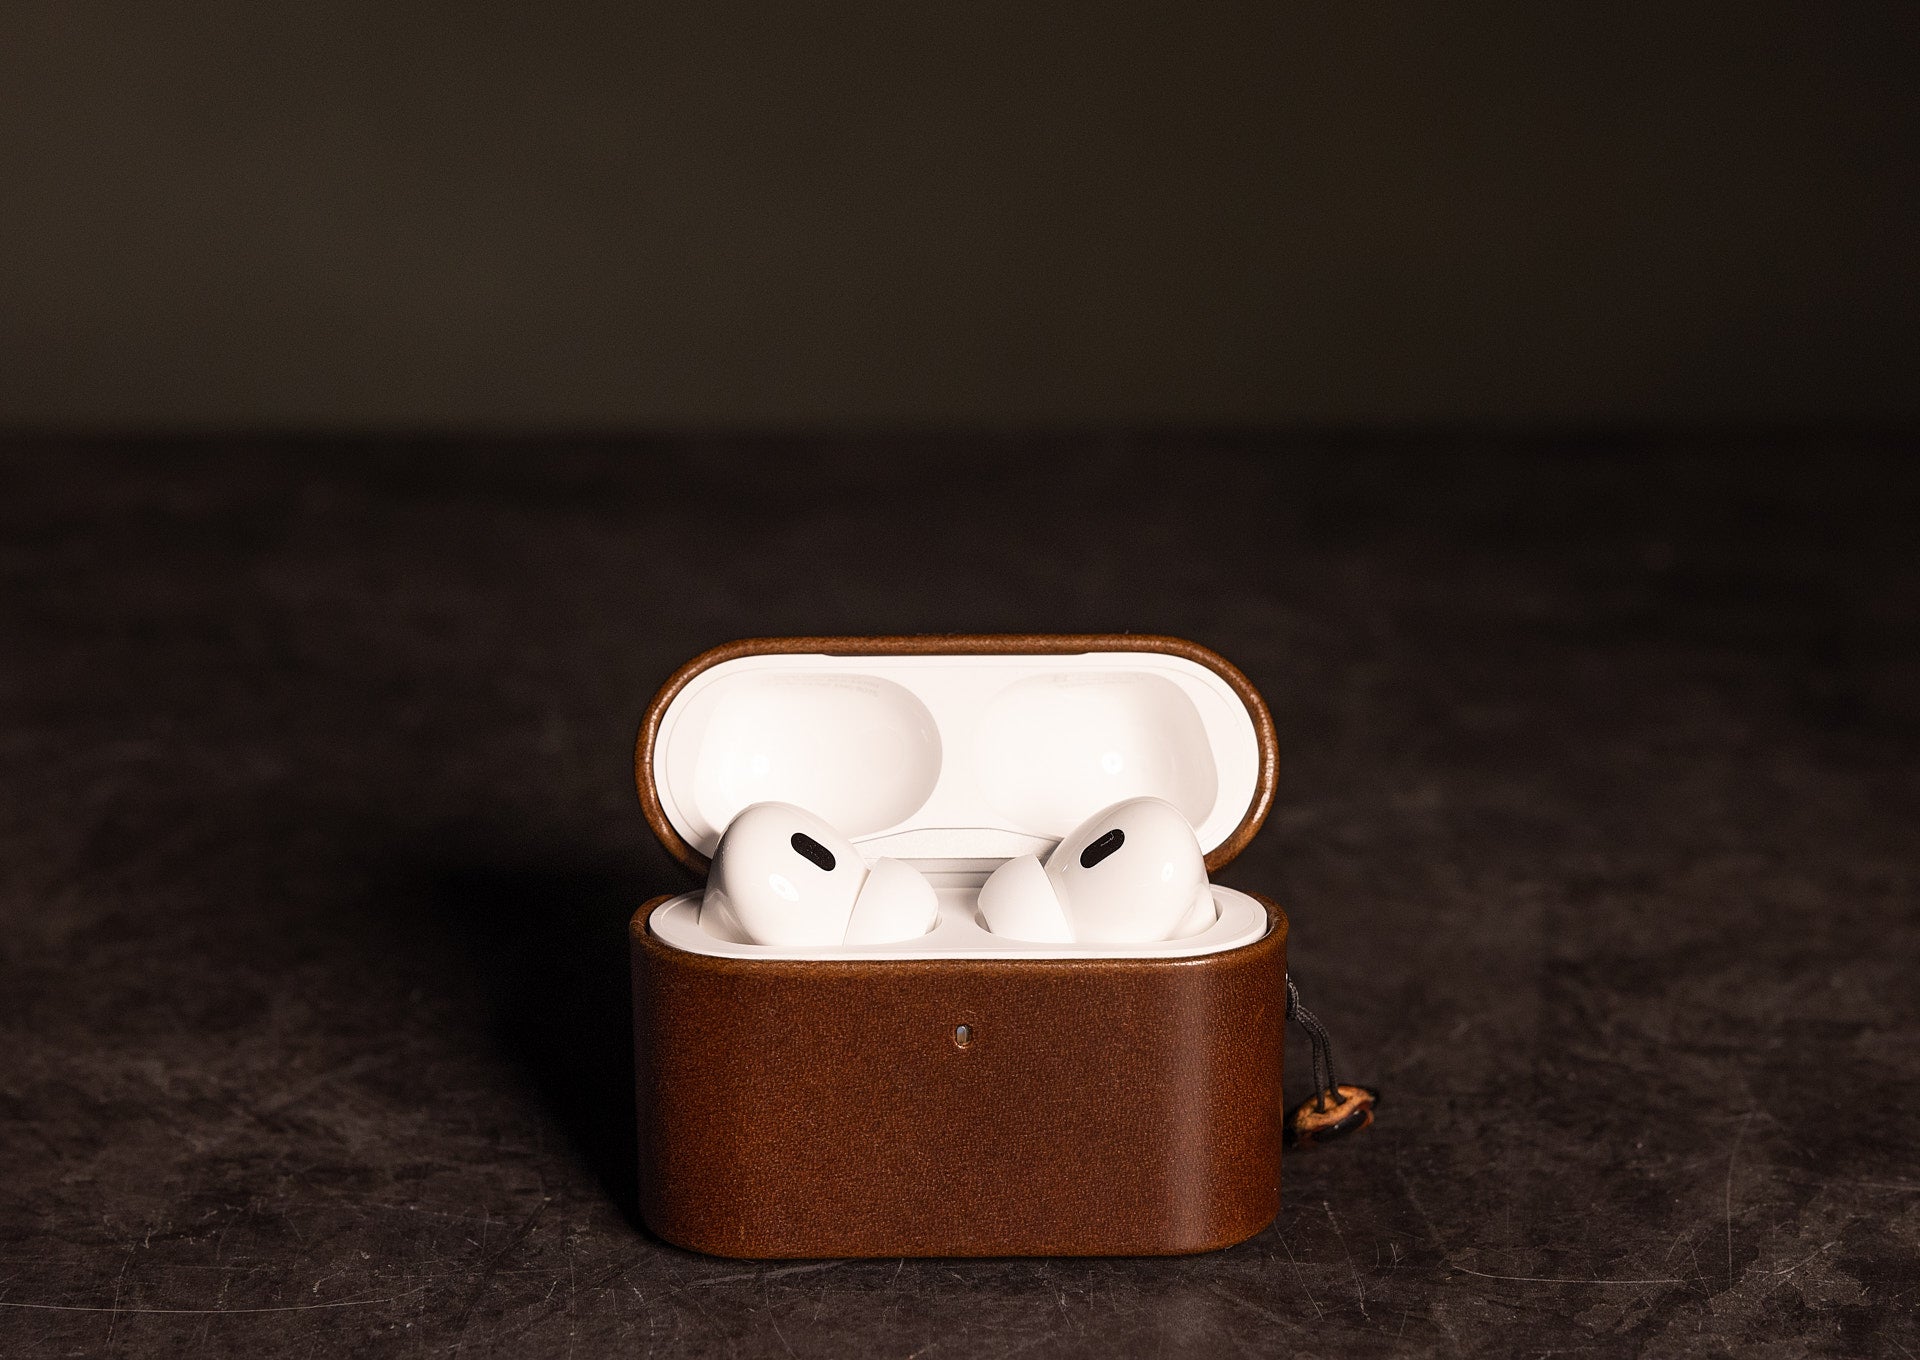  Pujuyeka Leather Luxury Case for AirPods Pro 2nd Gen